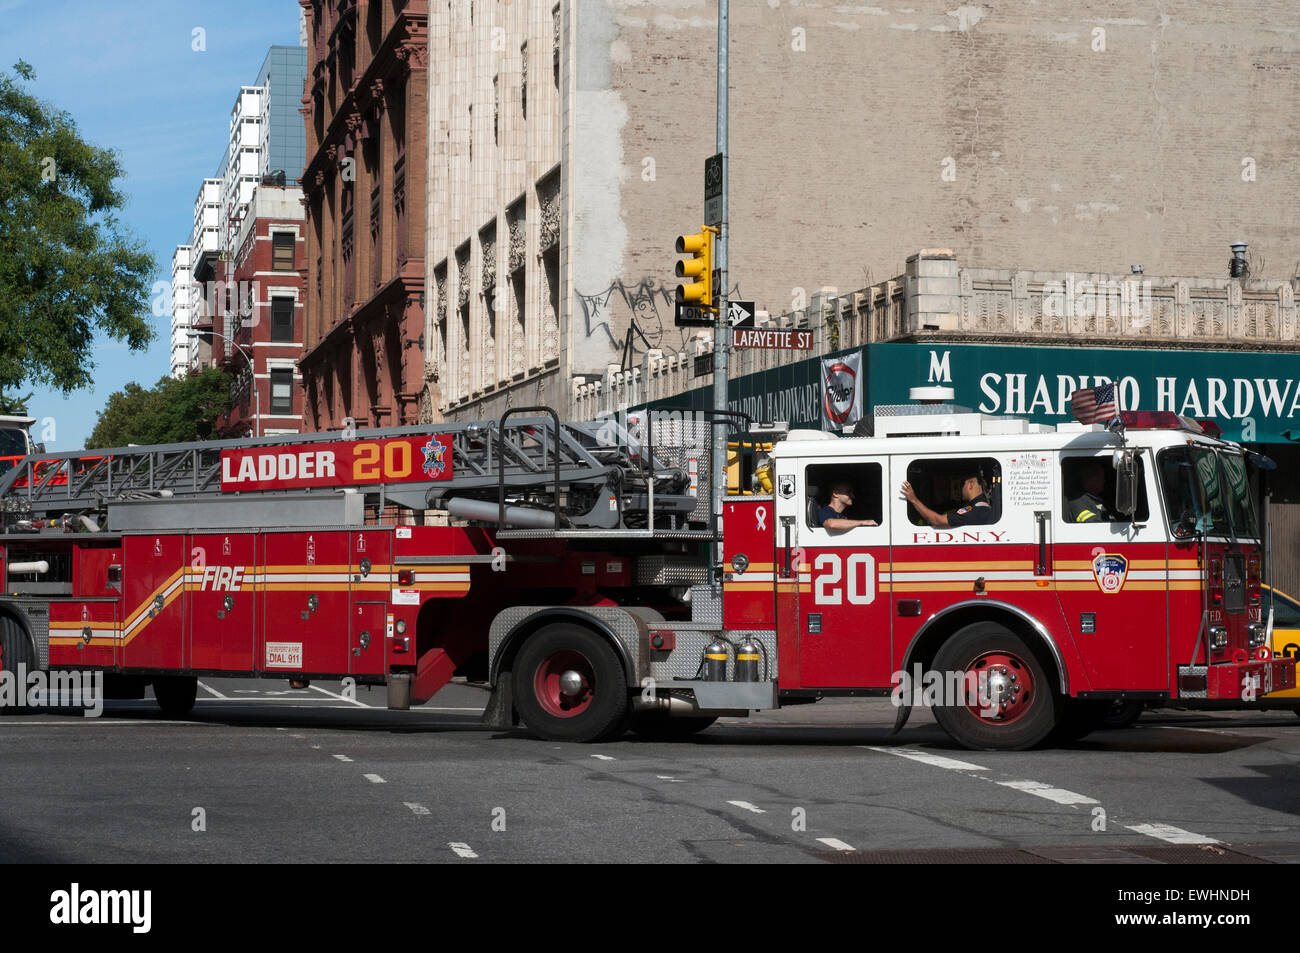 A long fire truck from the East Village. East Village is probably the social mecca of New York. Unlike Greenwich Village, Villag Stock Photo